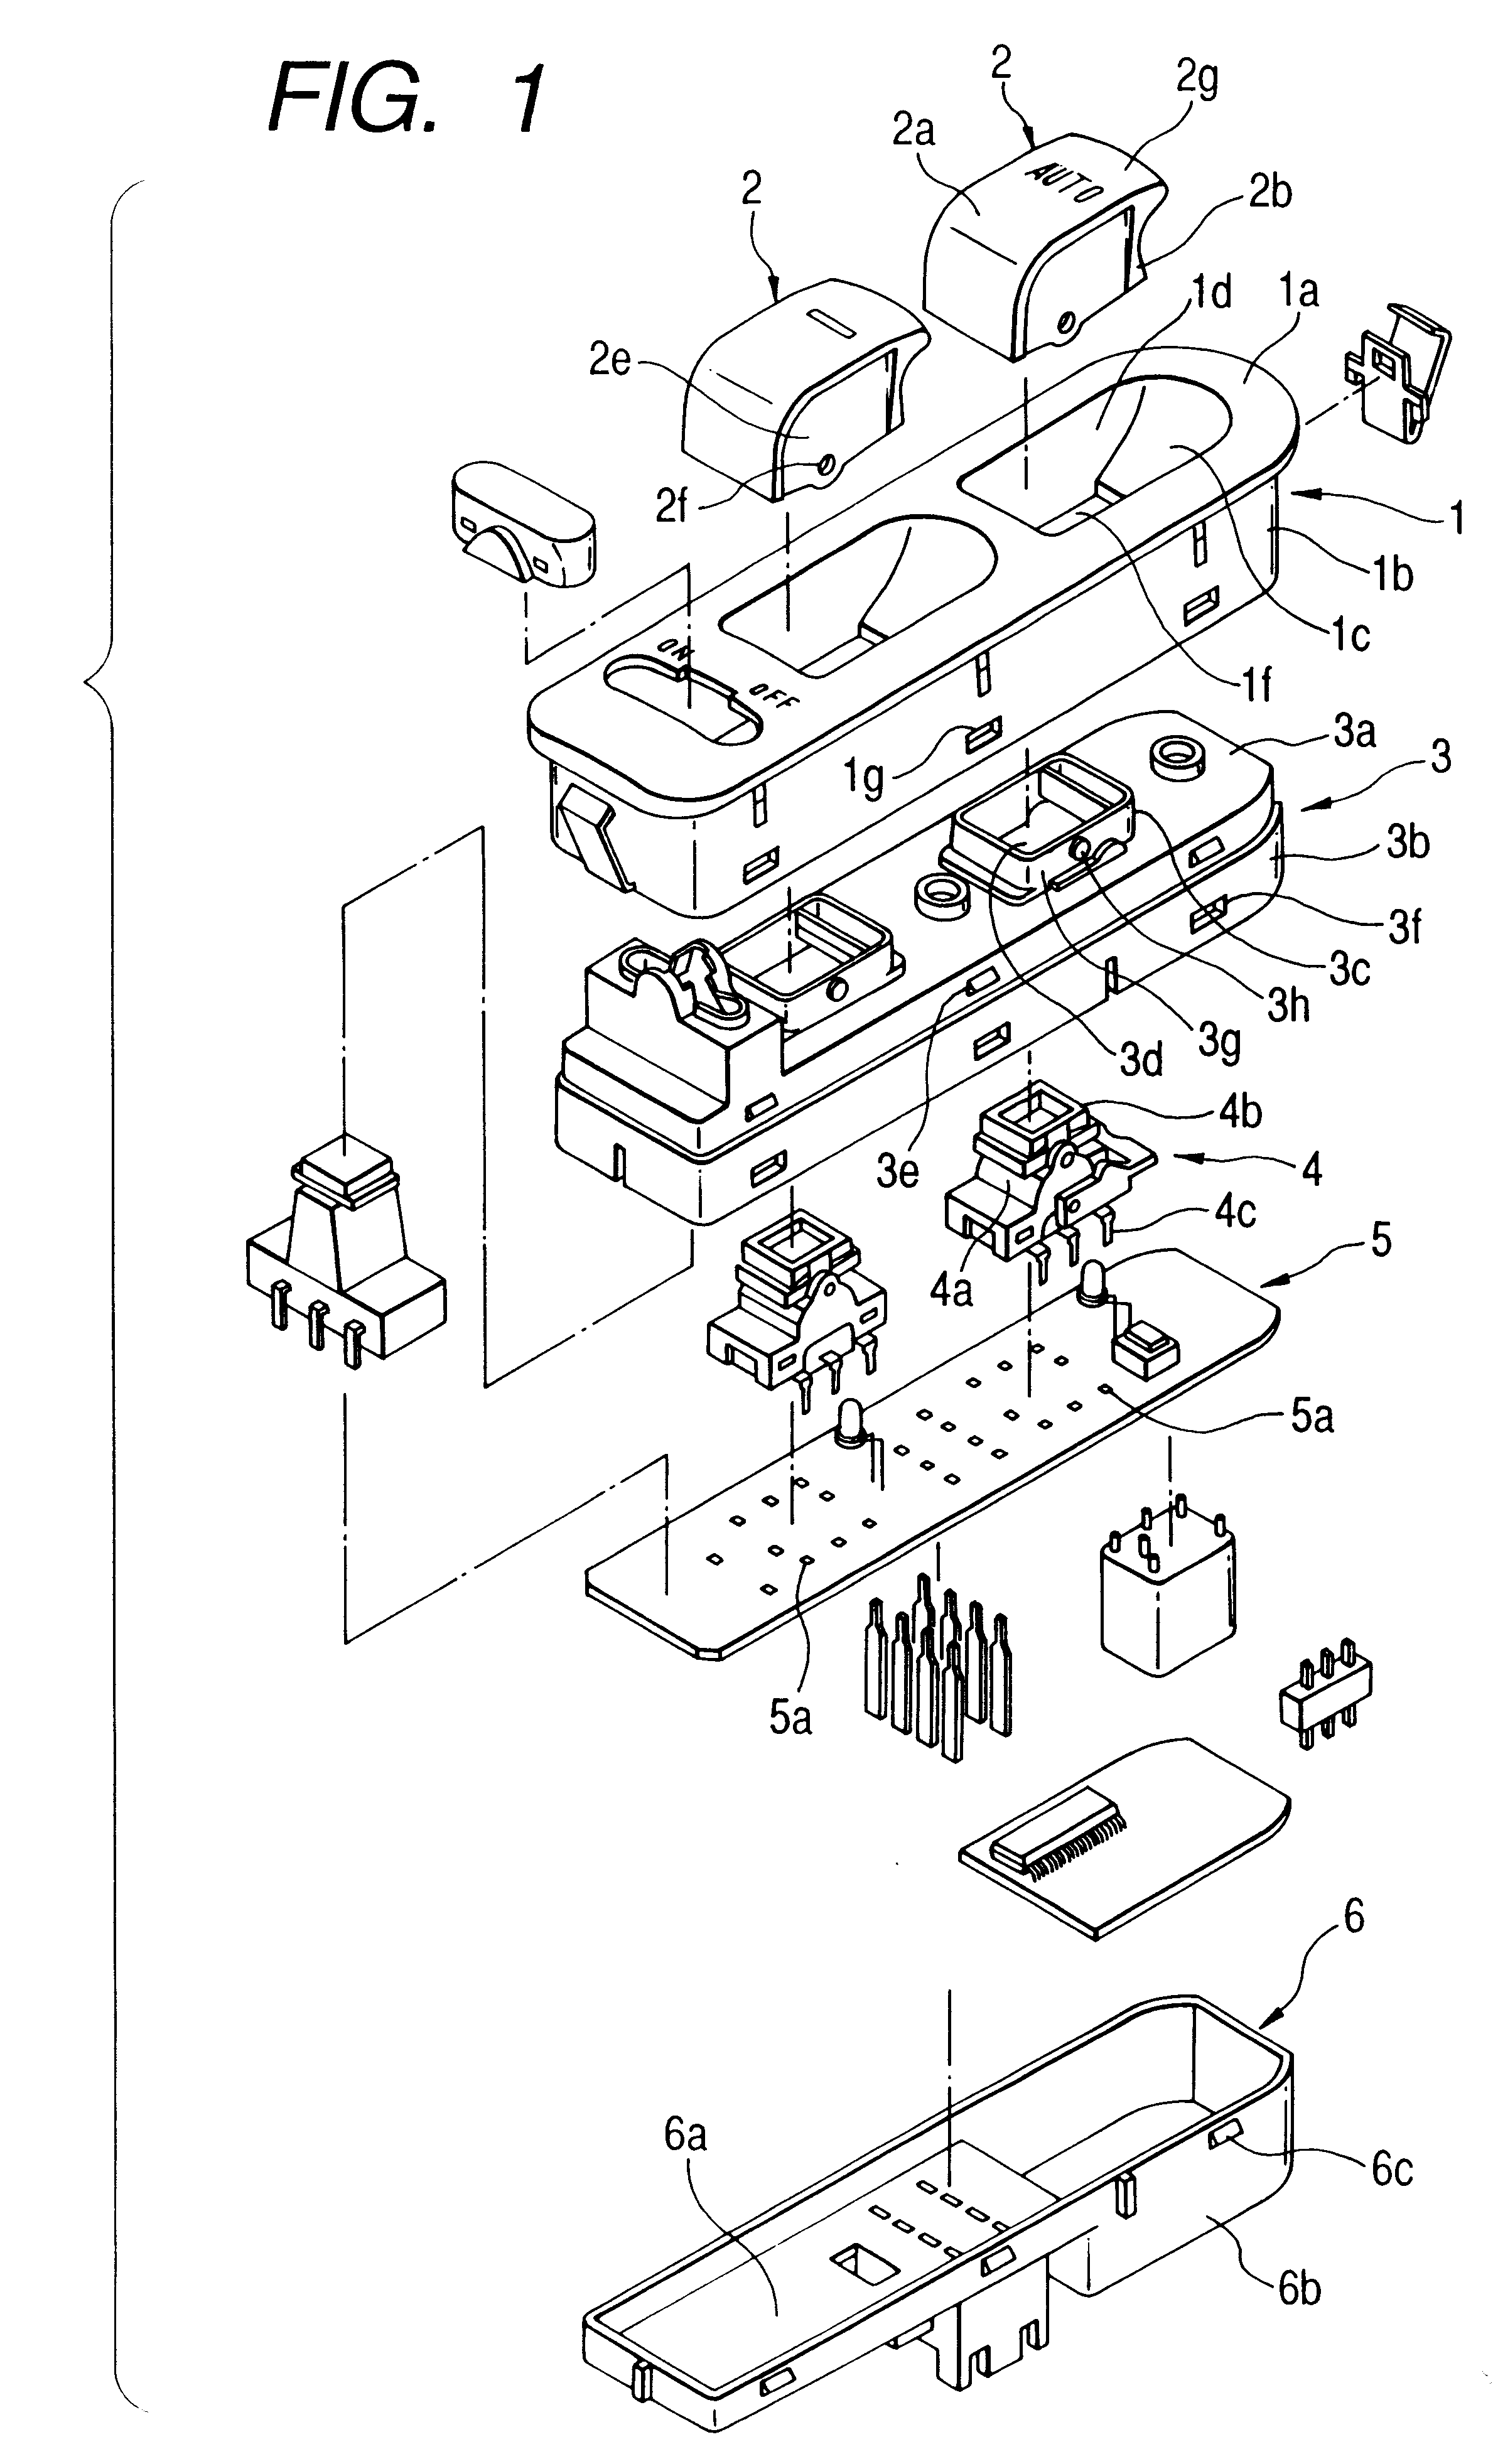 Switch device capable of maintaining stable knob operability over long term